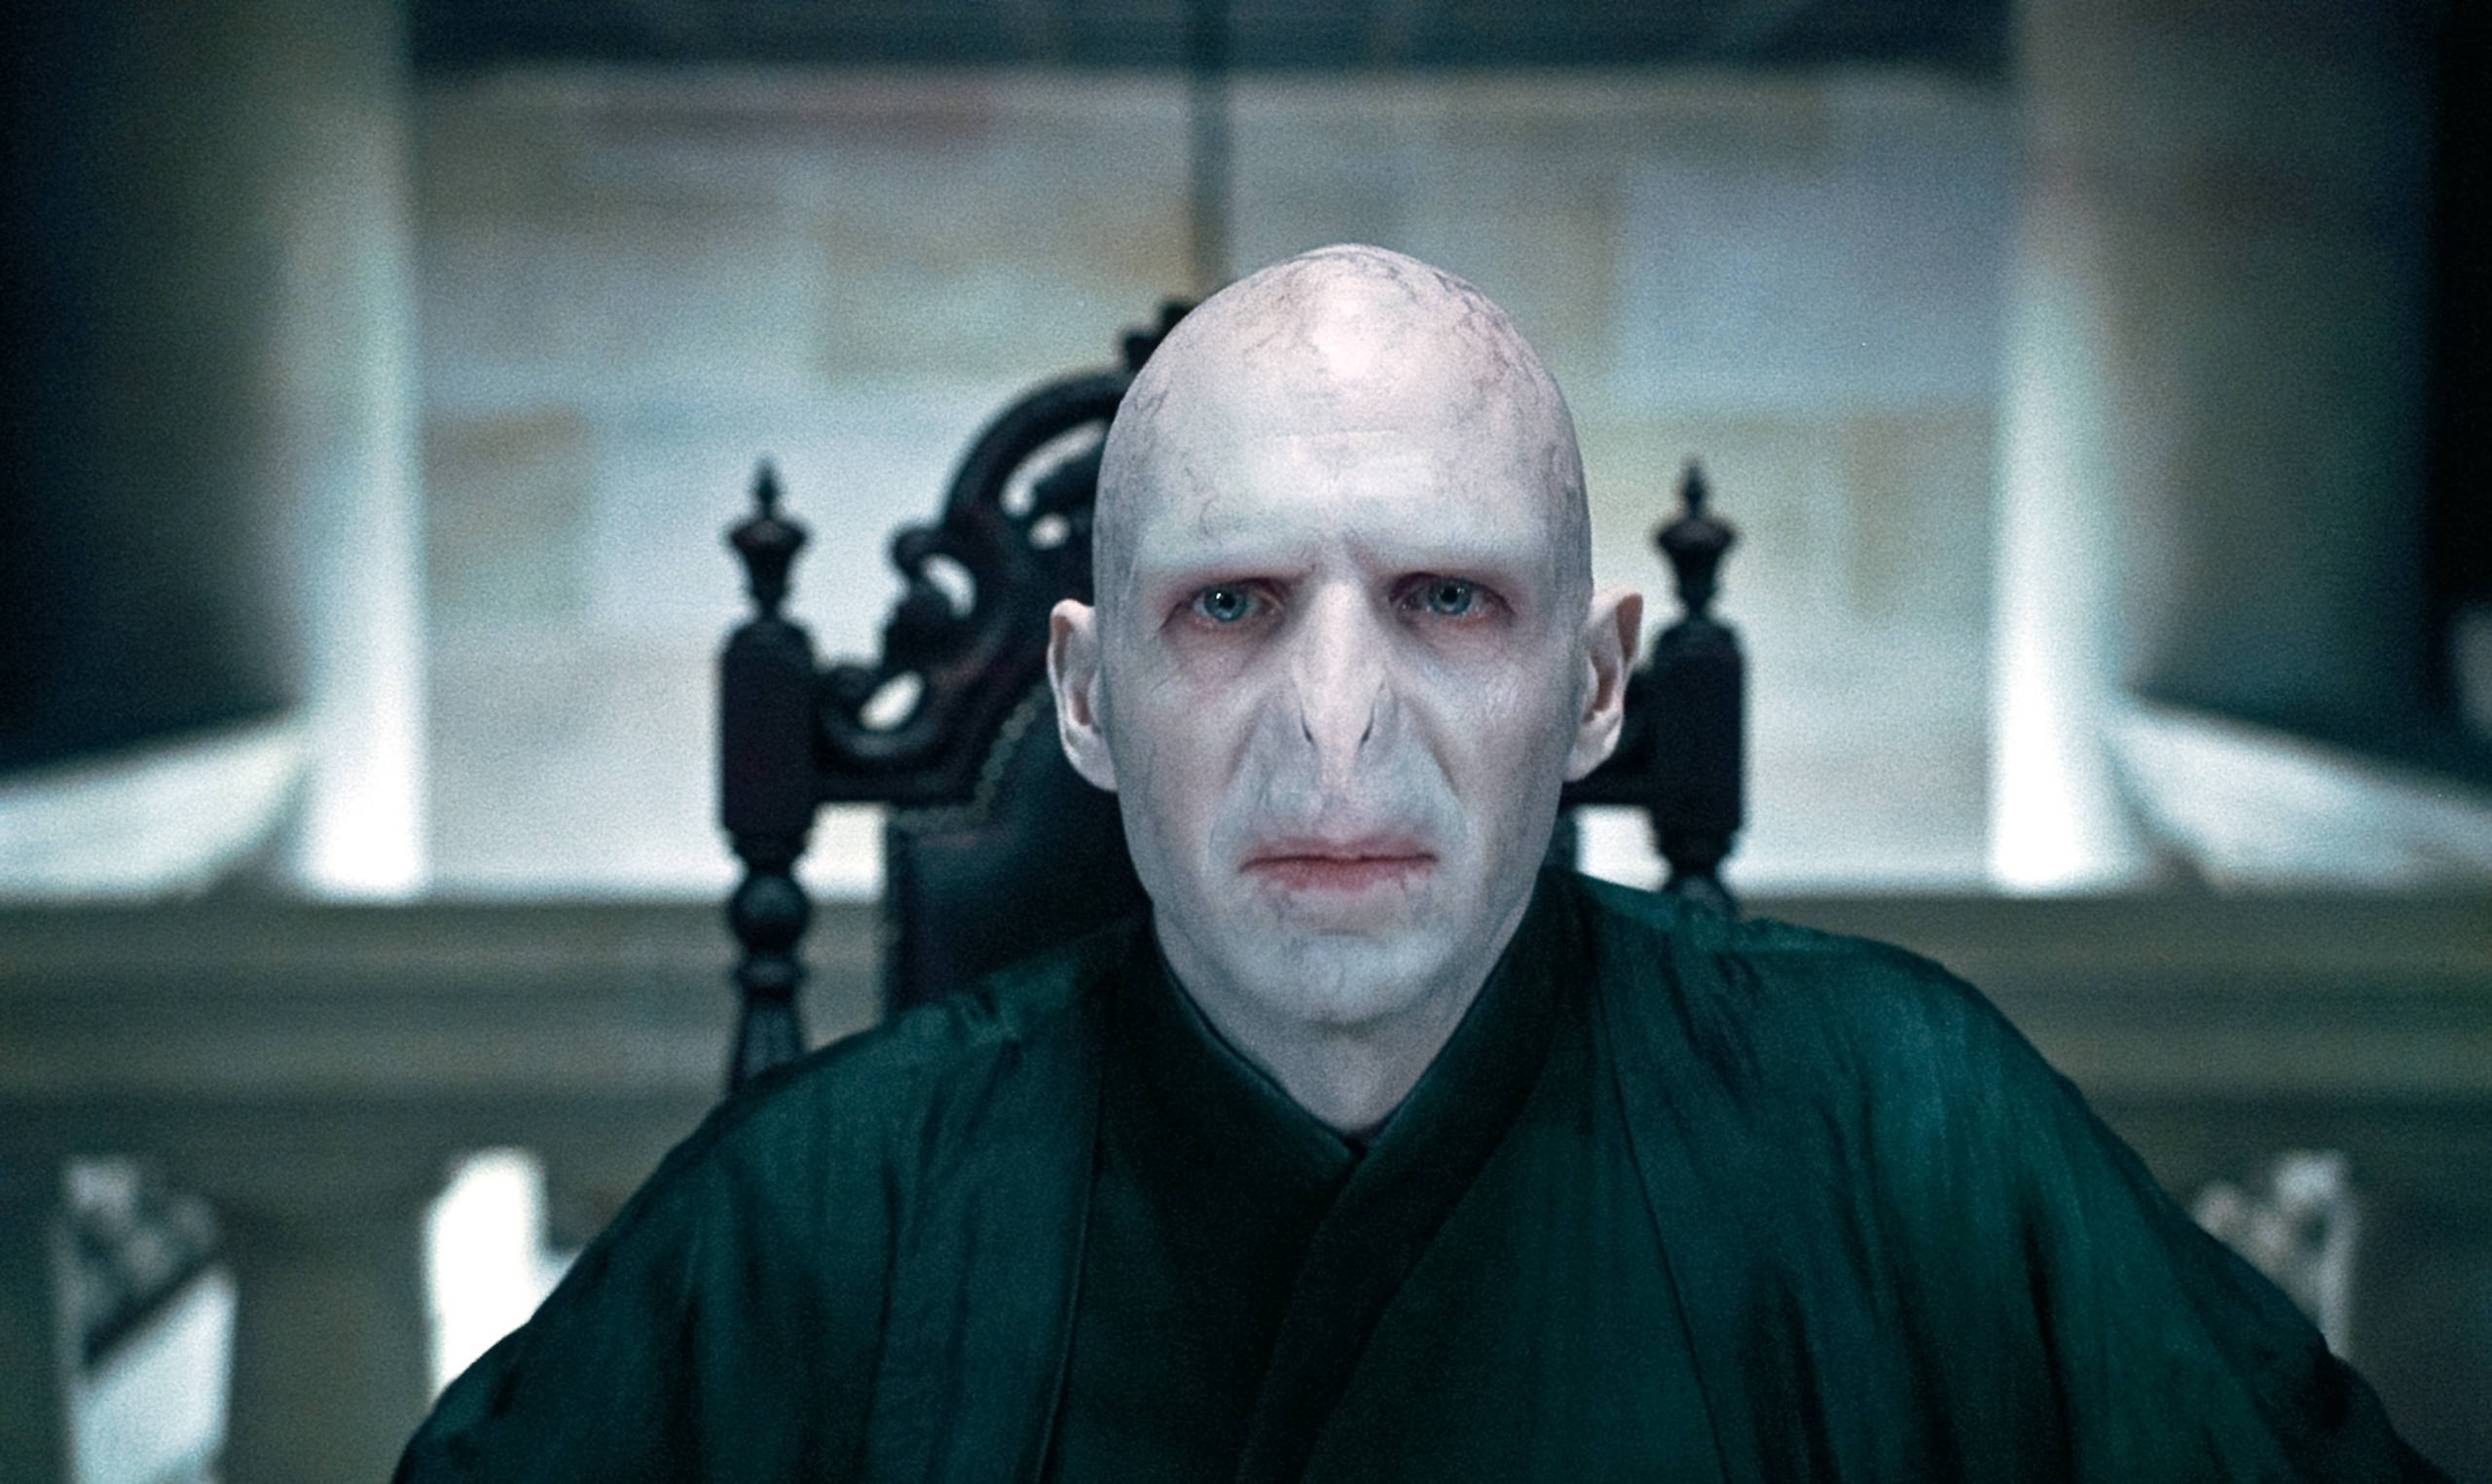 Voldemort stares ahead while in Malfoy Manor in a film still from the Deathly Hallows Part .